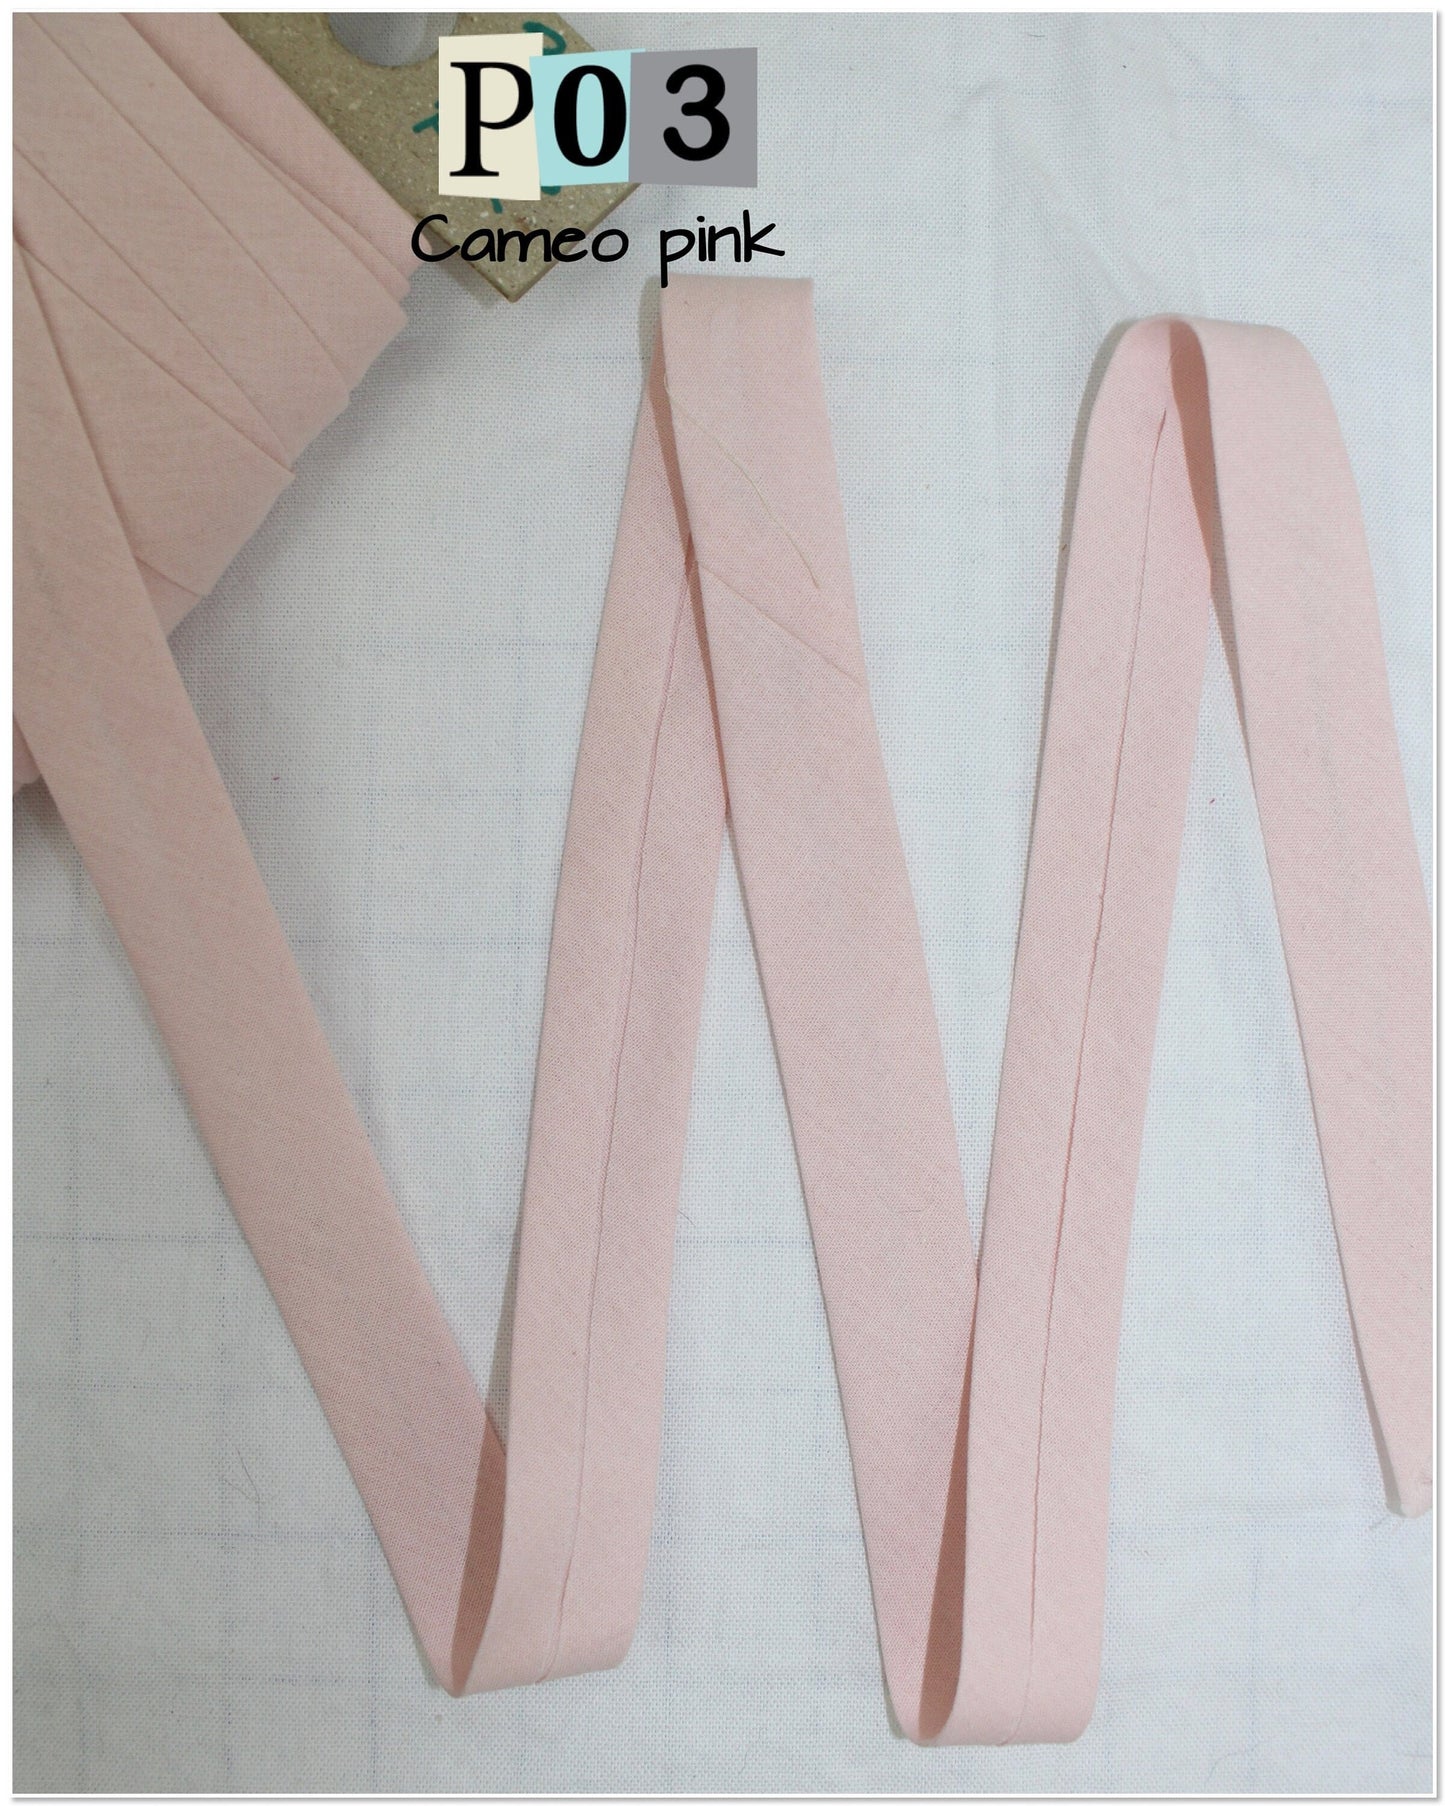 Bias Binding (tape) 25mm or 12mm, single fold, 100% Cotton. pink, baby pink, musk. Fusible iron on available.